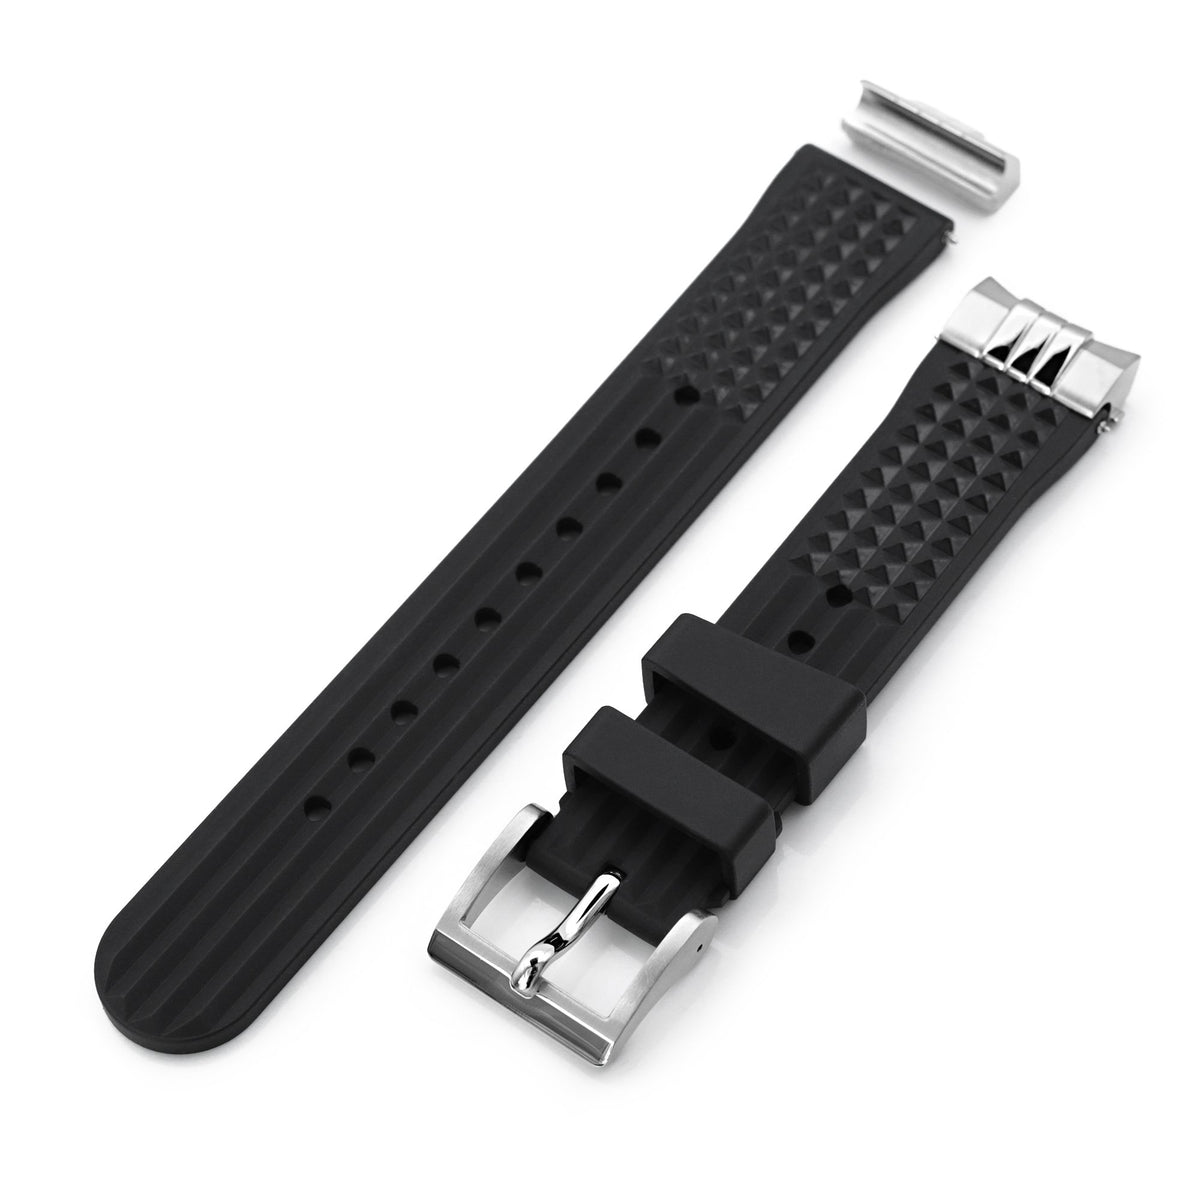 Chaffle Black FKM Rubber + Add-on End Piece watch strap for Seiko Sumo SPB103 Strapcode Watch Bands